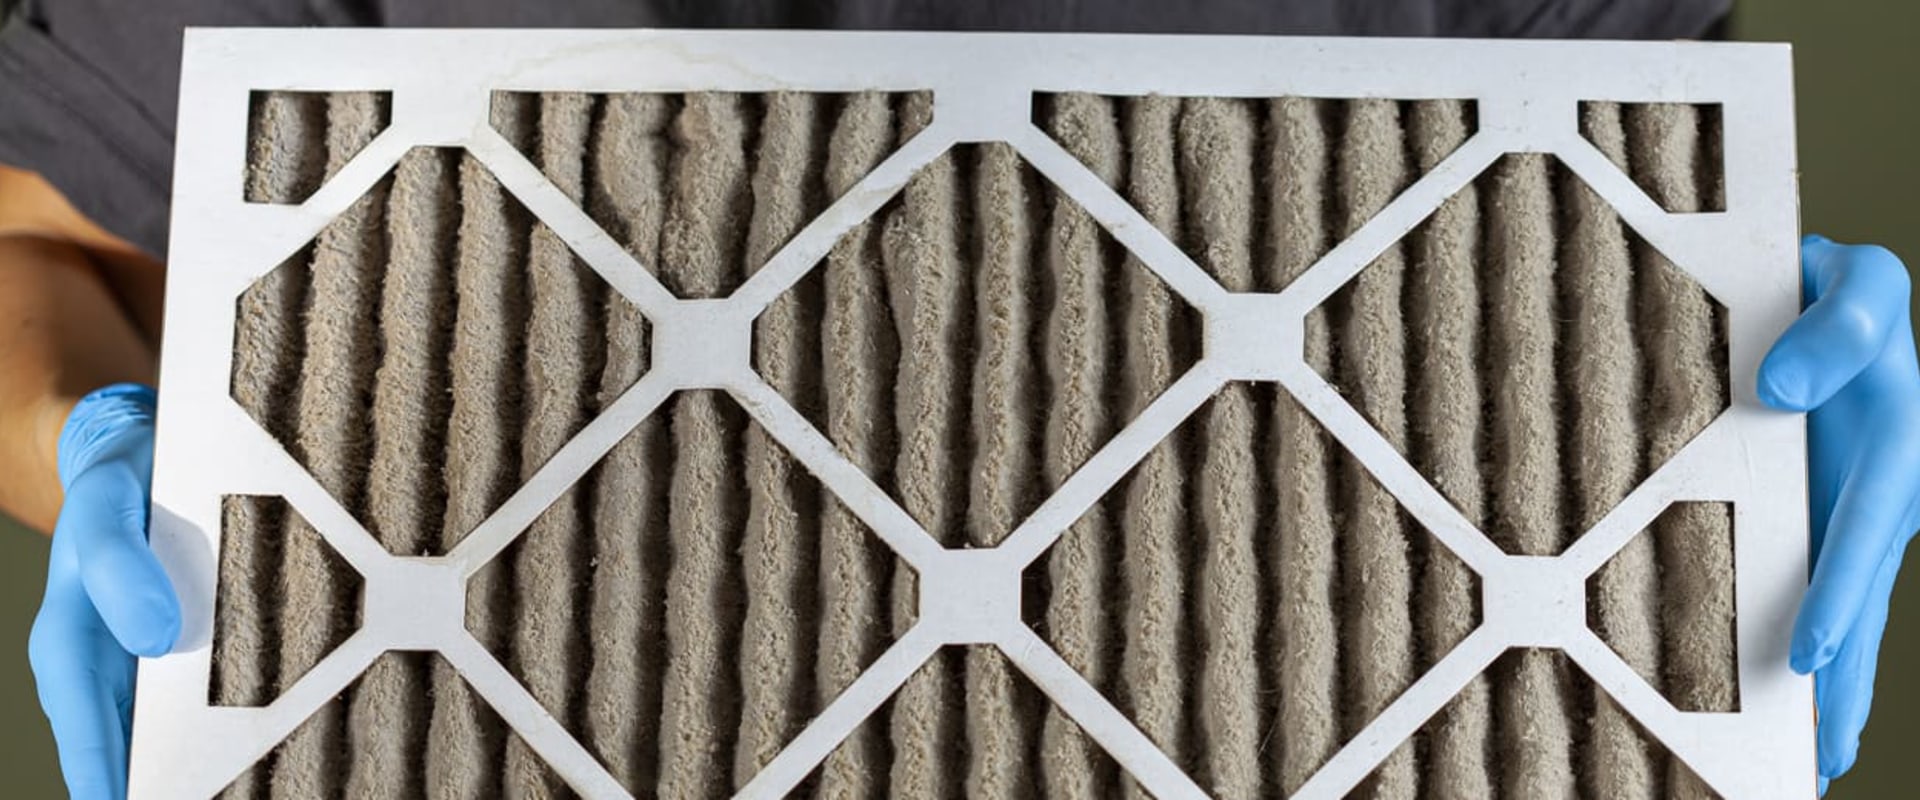 Air Filter MERV Ratings Chart: The Ultimate Comparison Tool